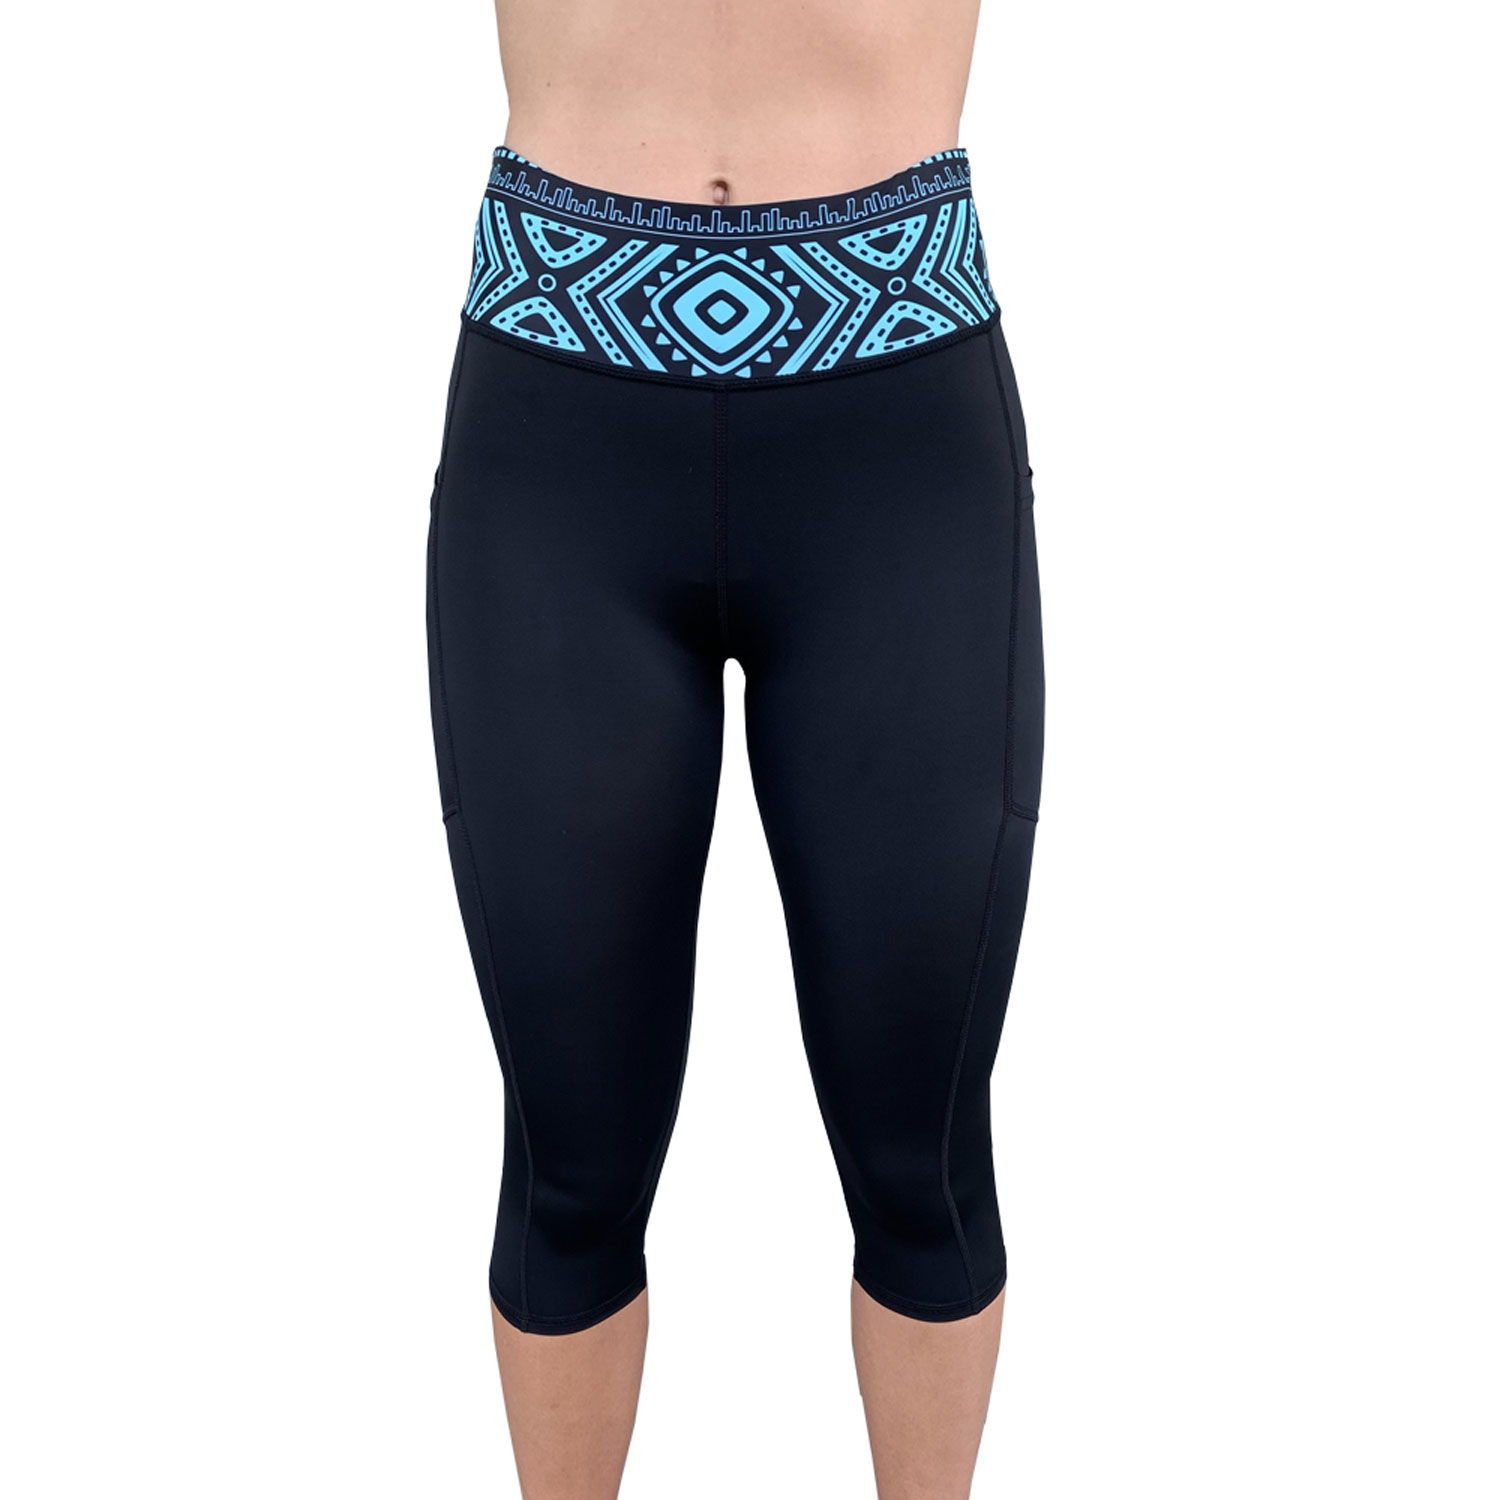 Vaikobi Active Paddle Capri Pants 2022 - Black/Teal VK-240 | Coast Outdoors  | Great Deals on Skiing, Snowboarding  Much More